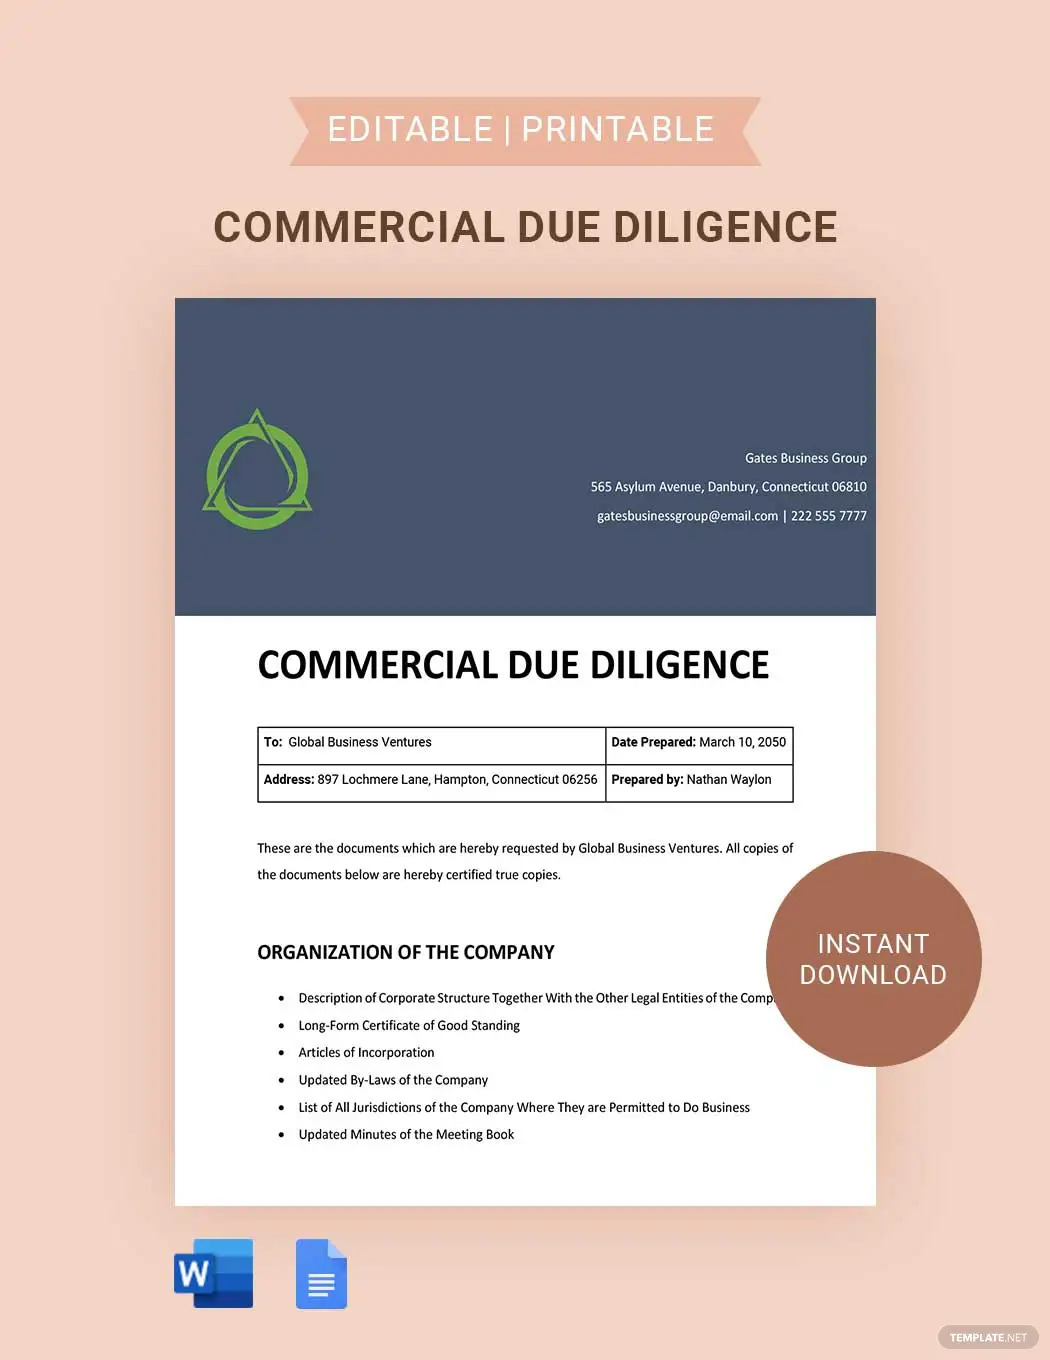 commercial due diligence ideas and examples